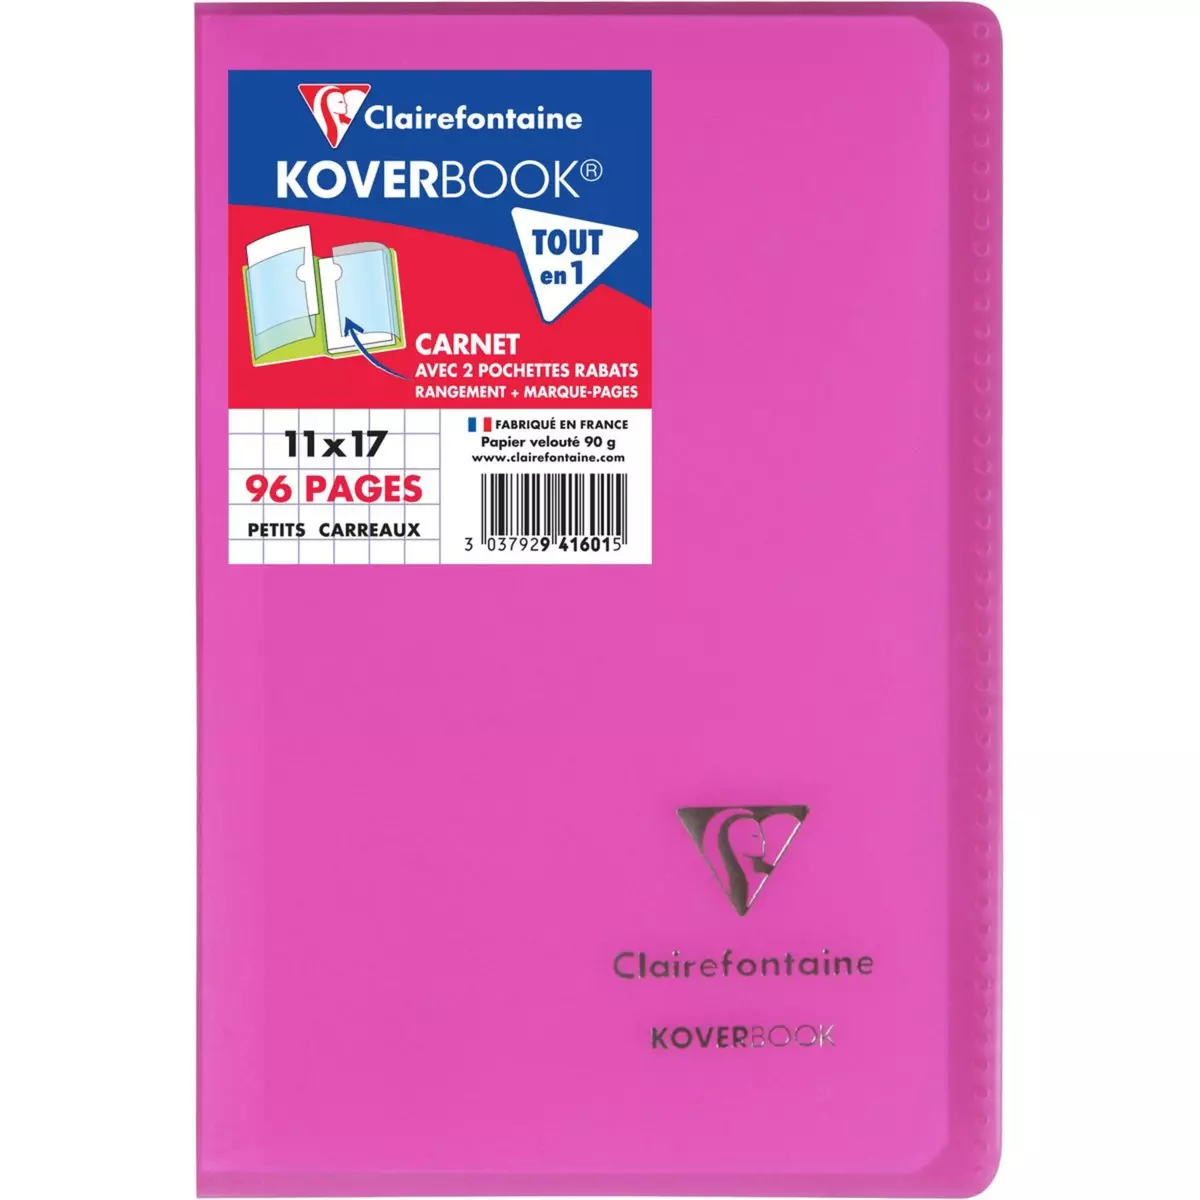 CLAIREFONTAINE Carnet piqûre petits carreaux Kover Book 11x17 96 pages Clairefontaine - Rose